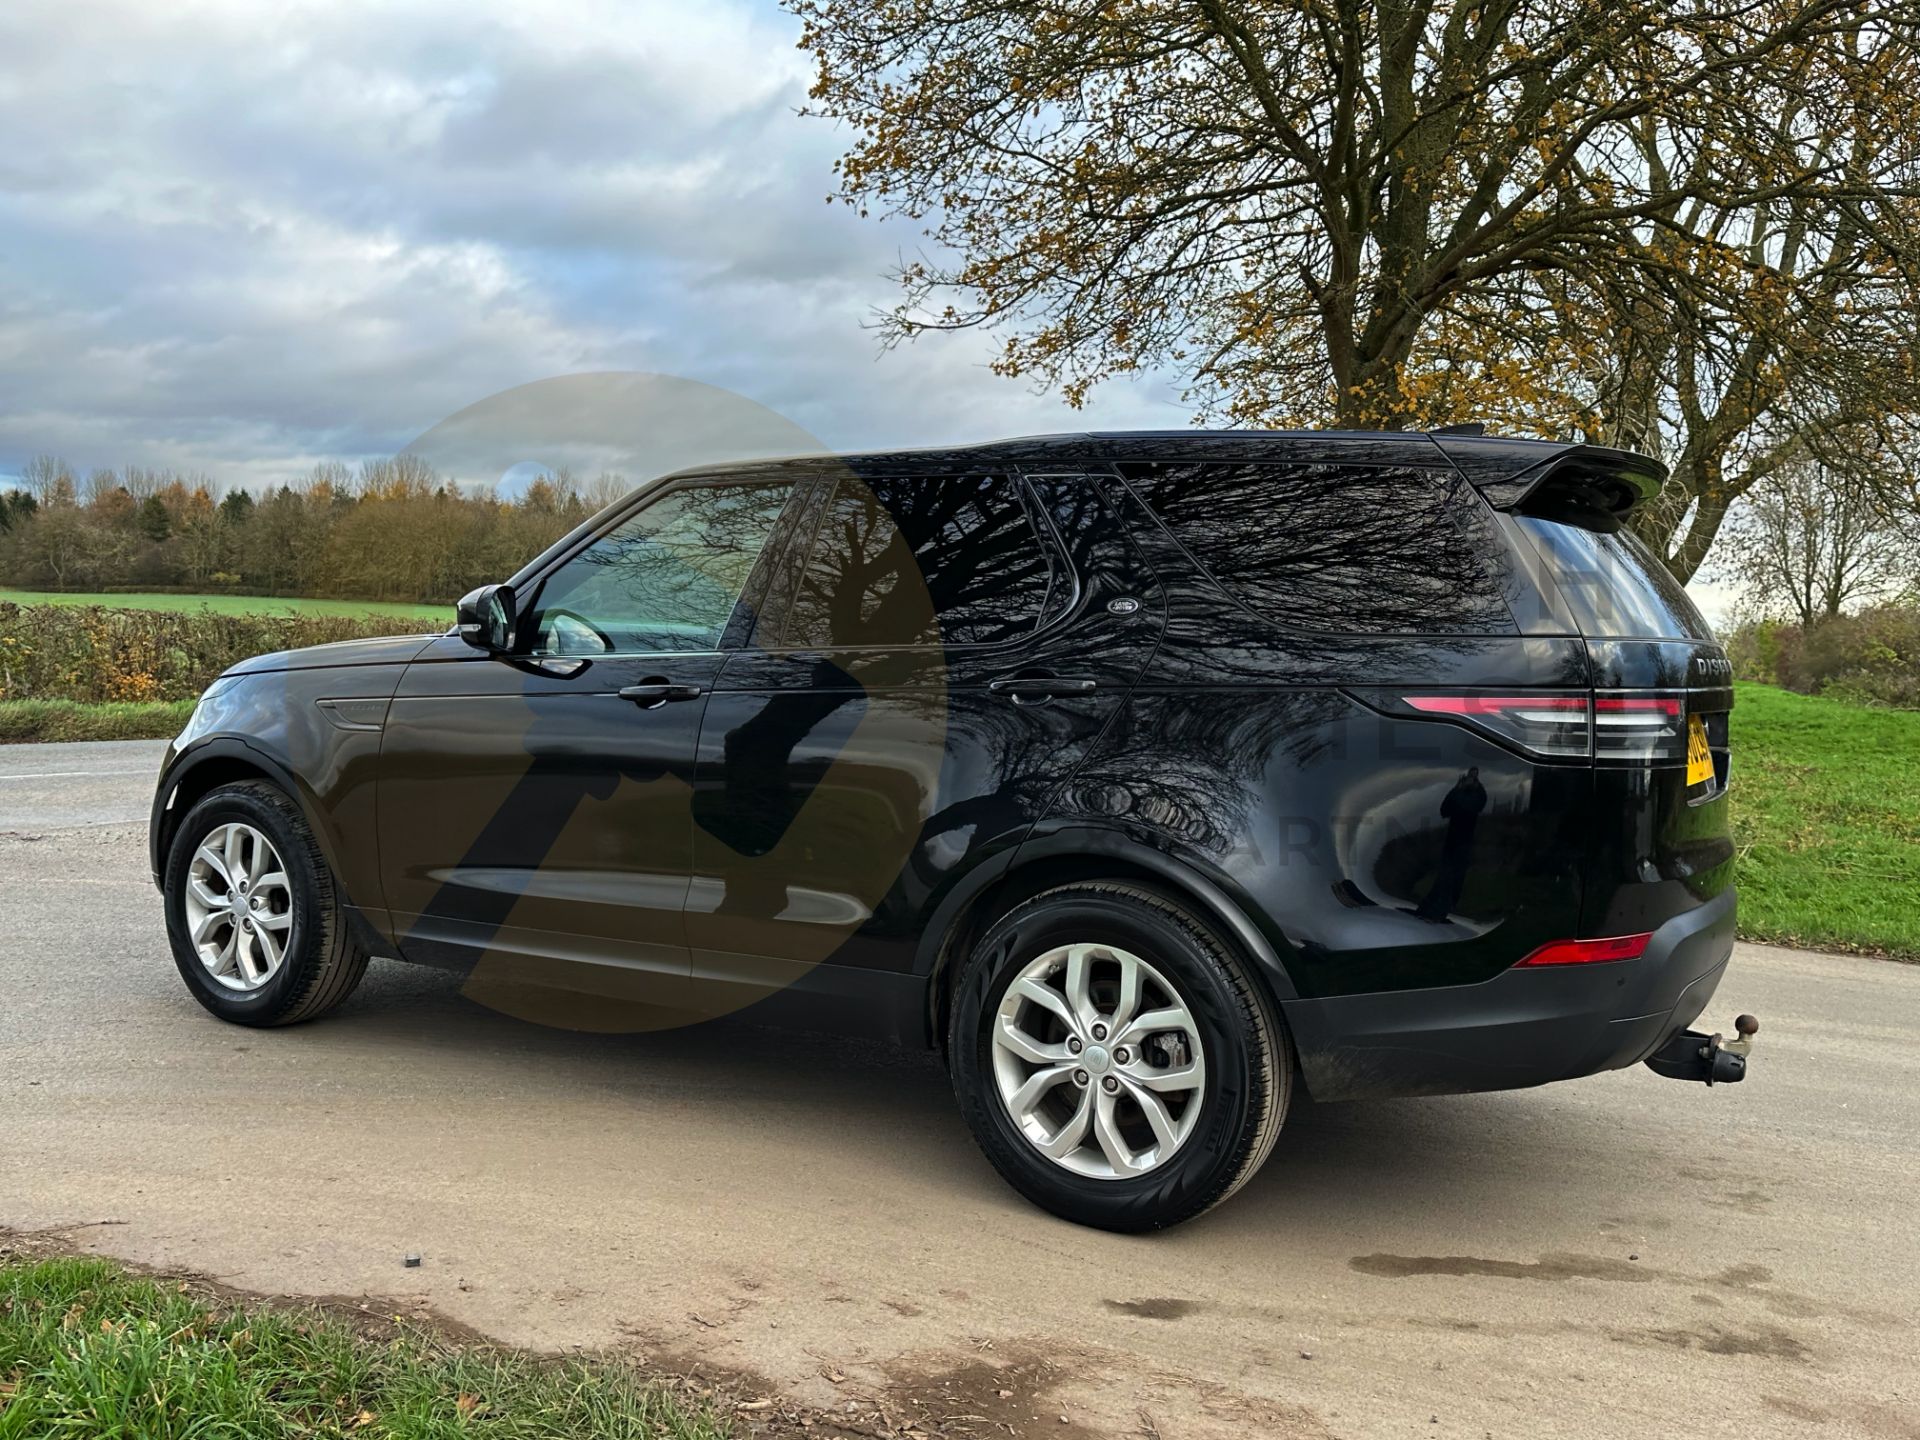 LAND ROVER DISCOVERY 5 *ALL NEW MODEL* (2021 - EURO 6) 8 SPEED AUTO (1 OWNER) *ONLY 19,000 MILES* - Image 9 of 50